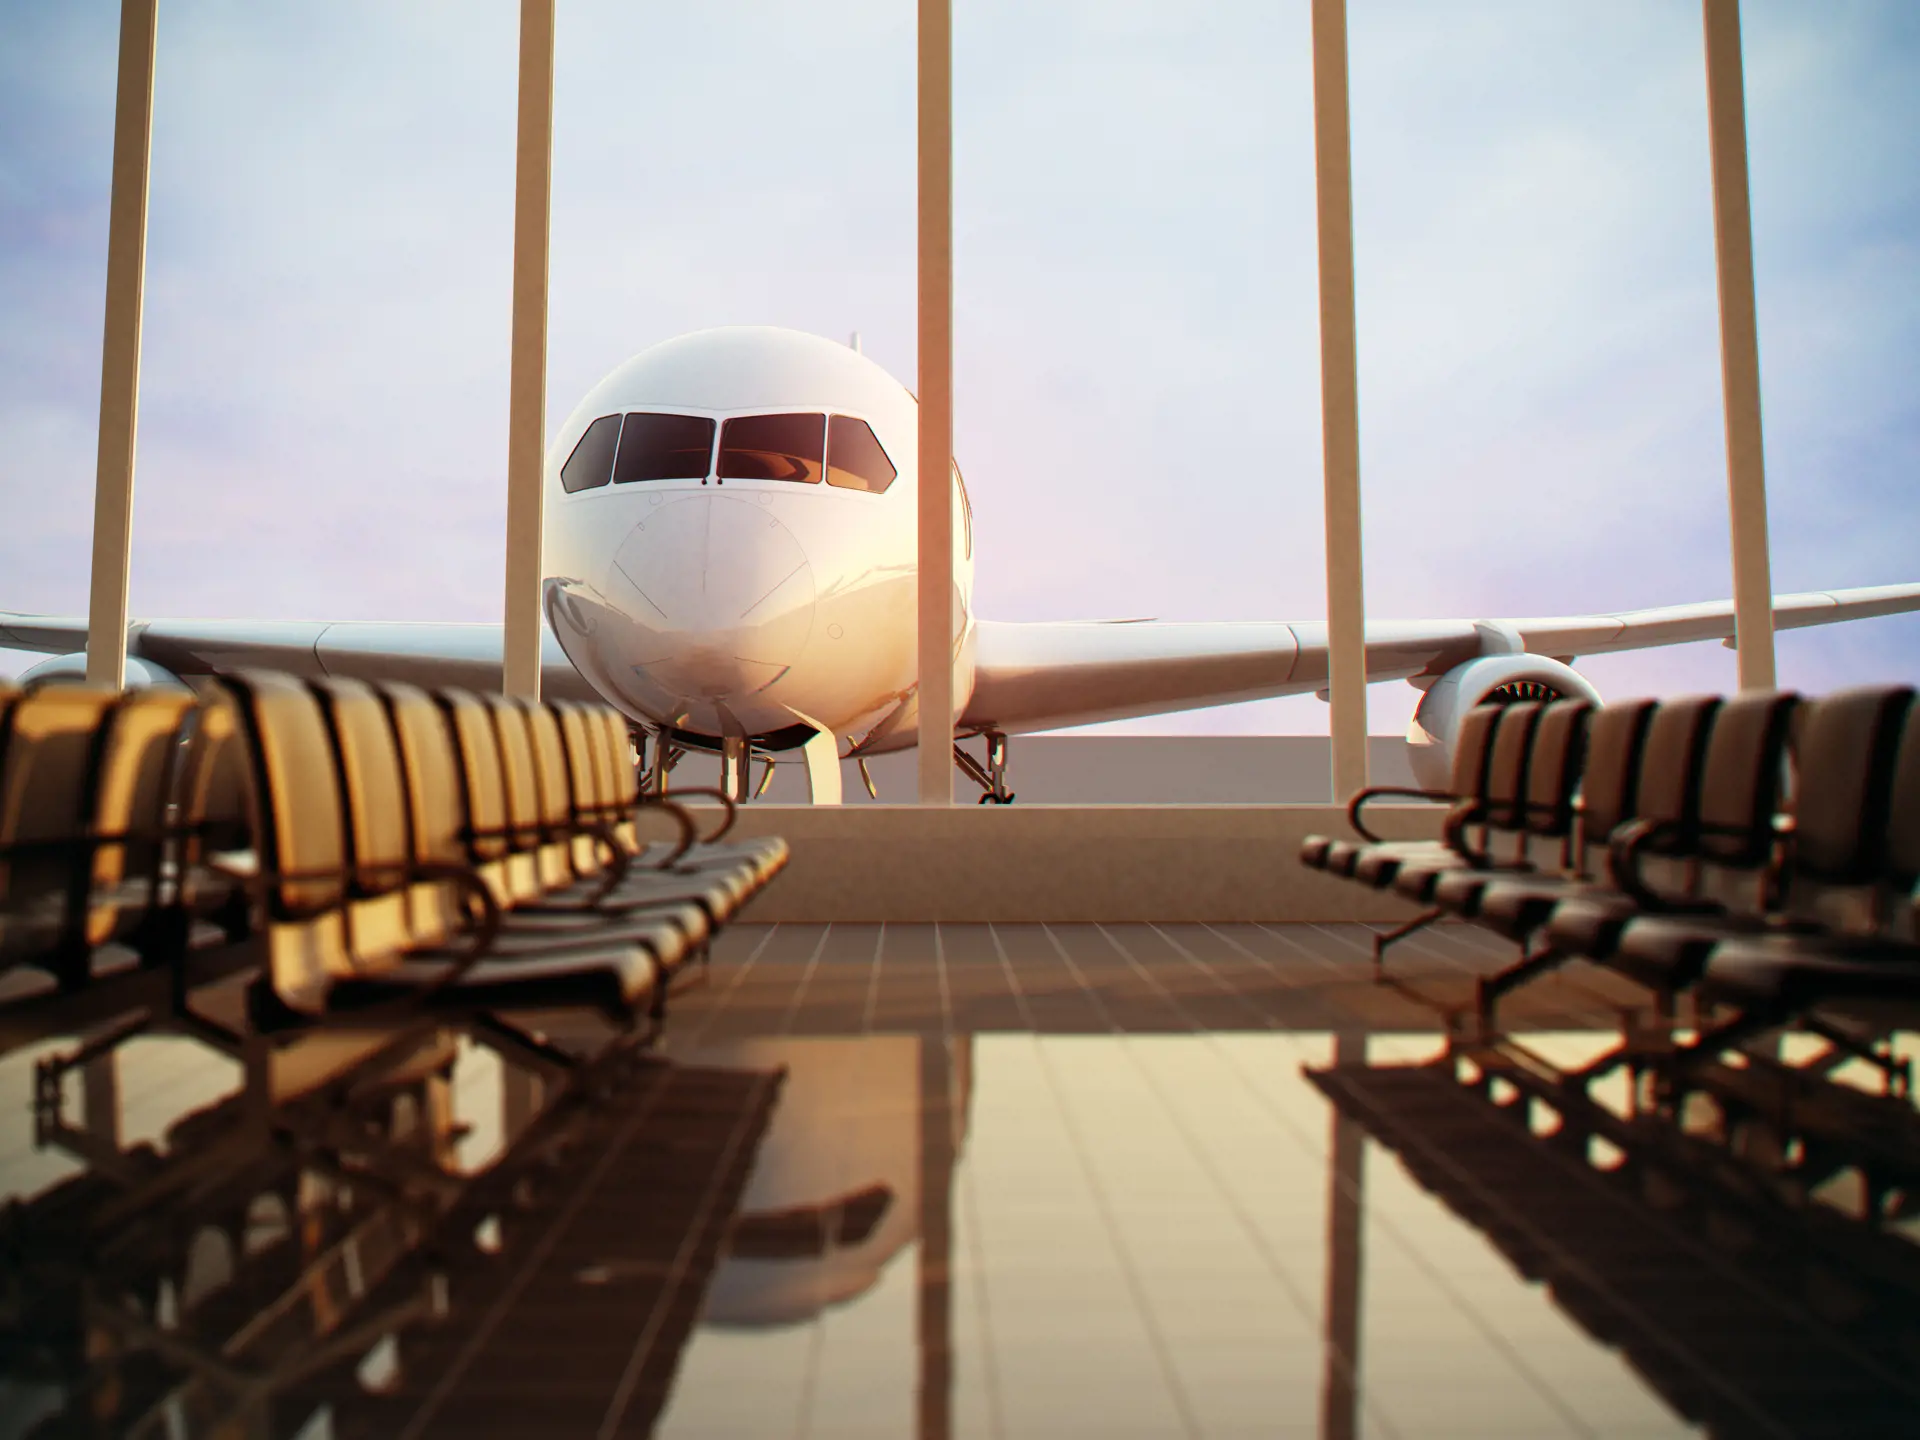 shutterstock_124713472 Airplane, view from airport terminal..jpg